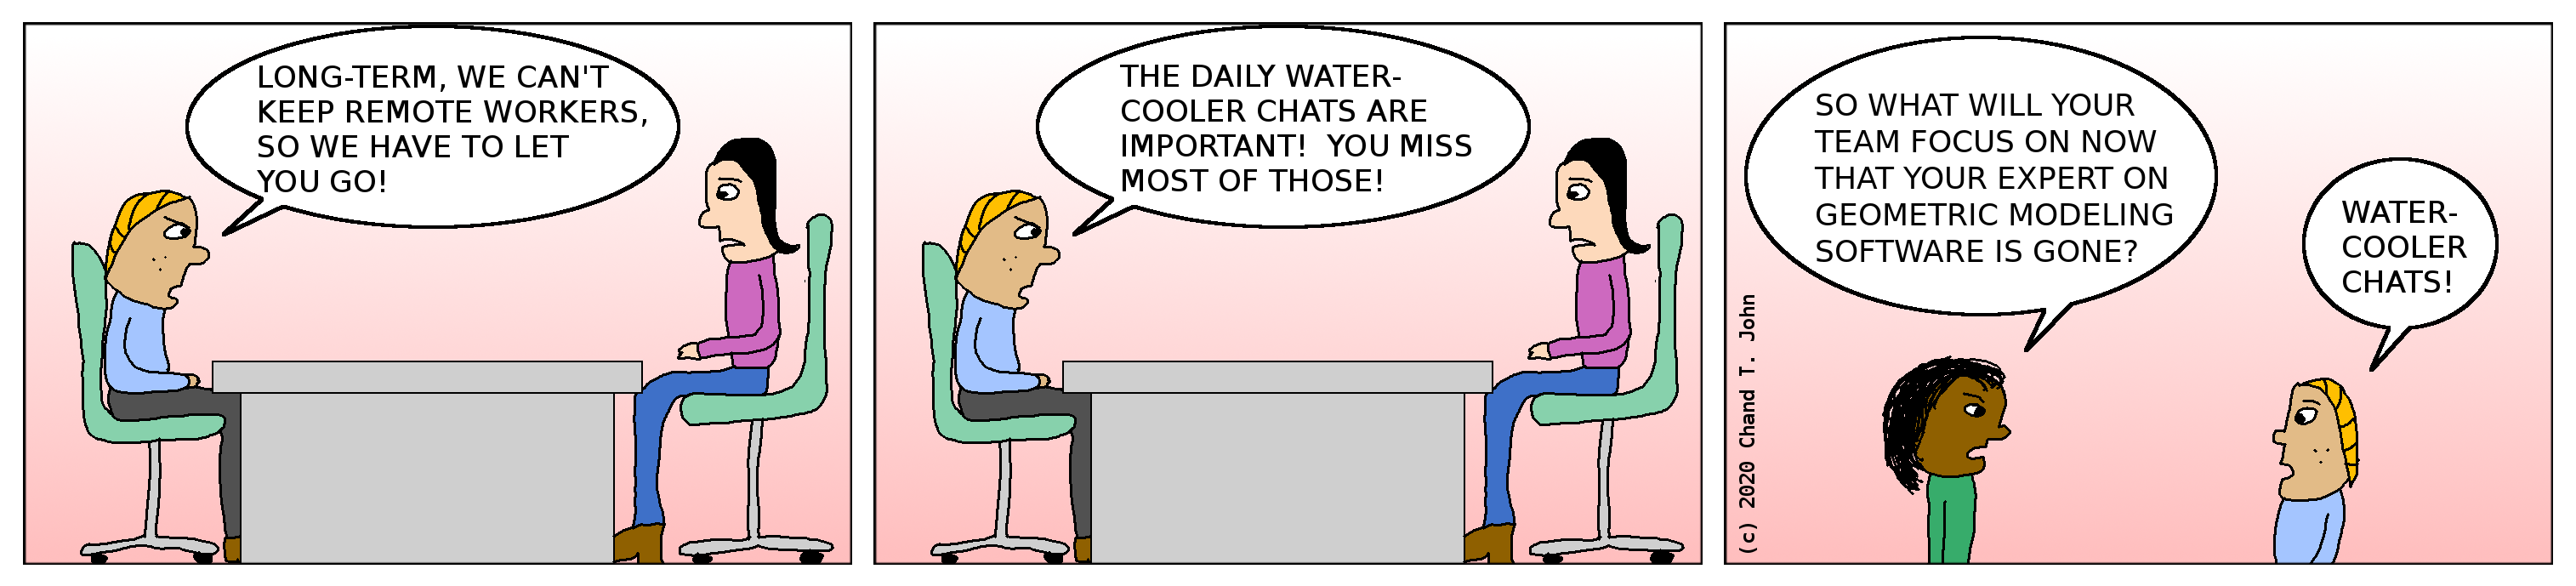 Boss says, "Long-term, we can't keep remote workers, so we have to let you go! The daily water-cooler chats are important! You miss most of those!" Other boss asks first boss, "So what will your team focus on now that your expert on geometric modeling software is gone?" First boss replies, "Water-cooler chats!"